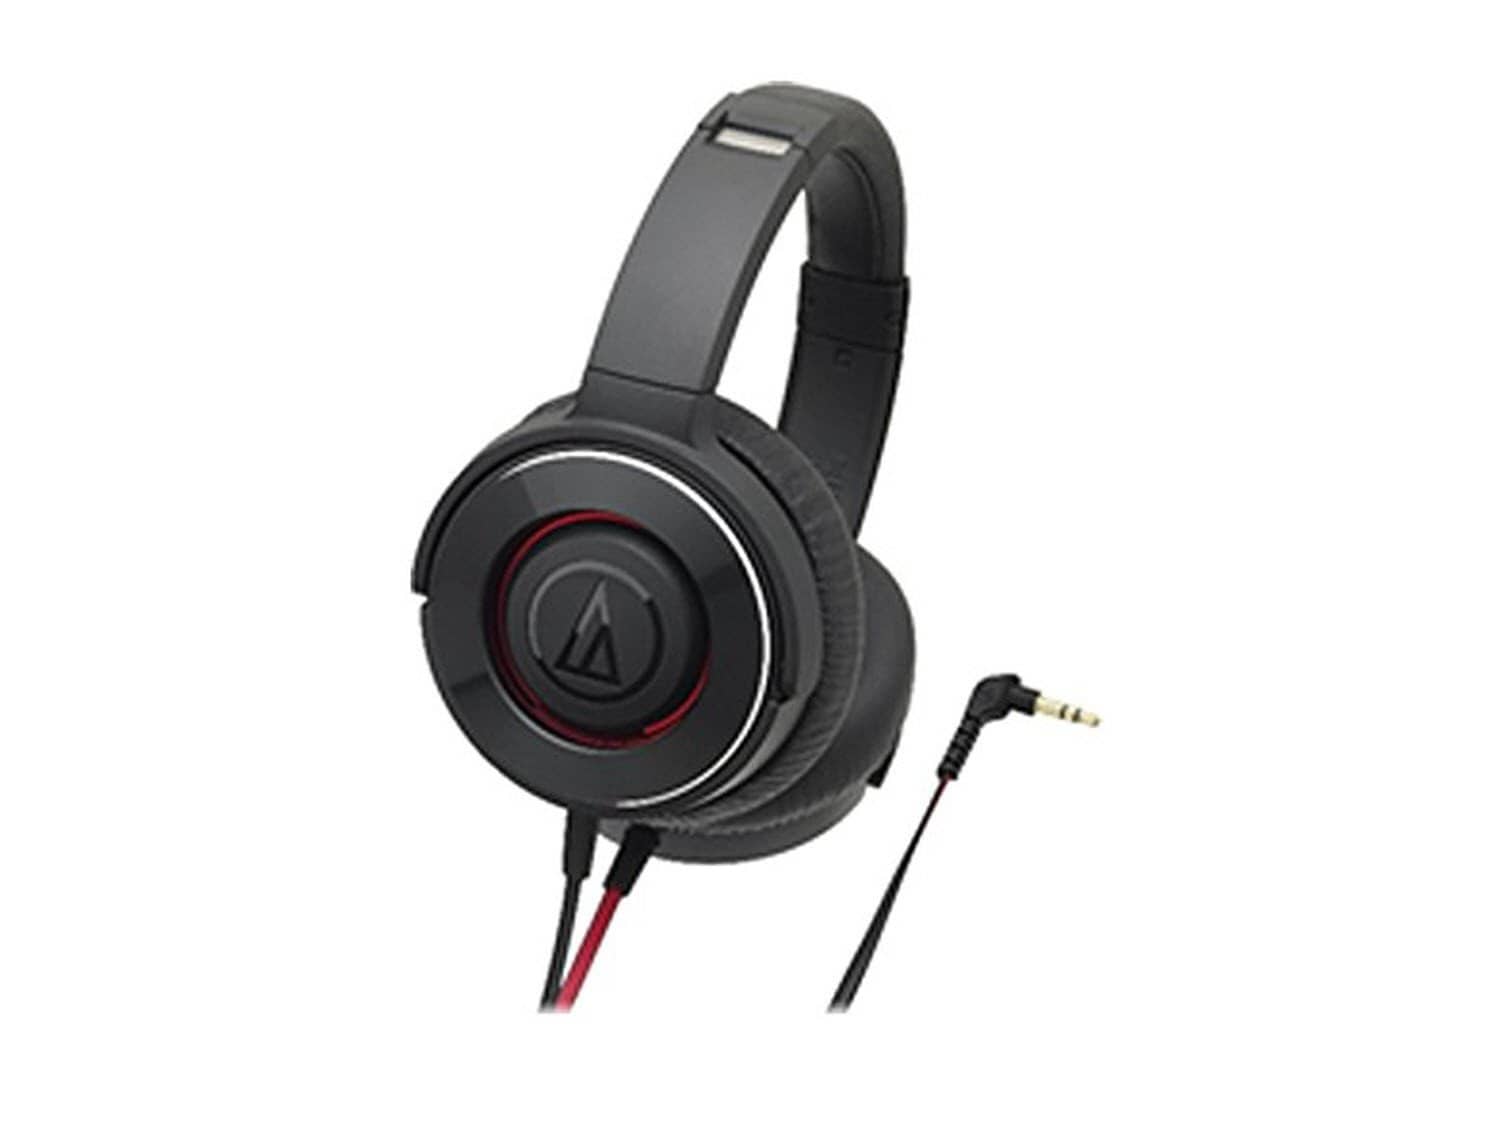 Audio-technica SOLID BASS Portable Headphone -Black/Red